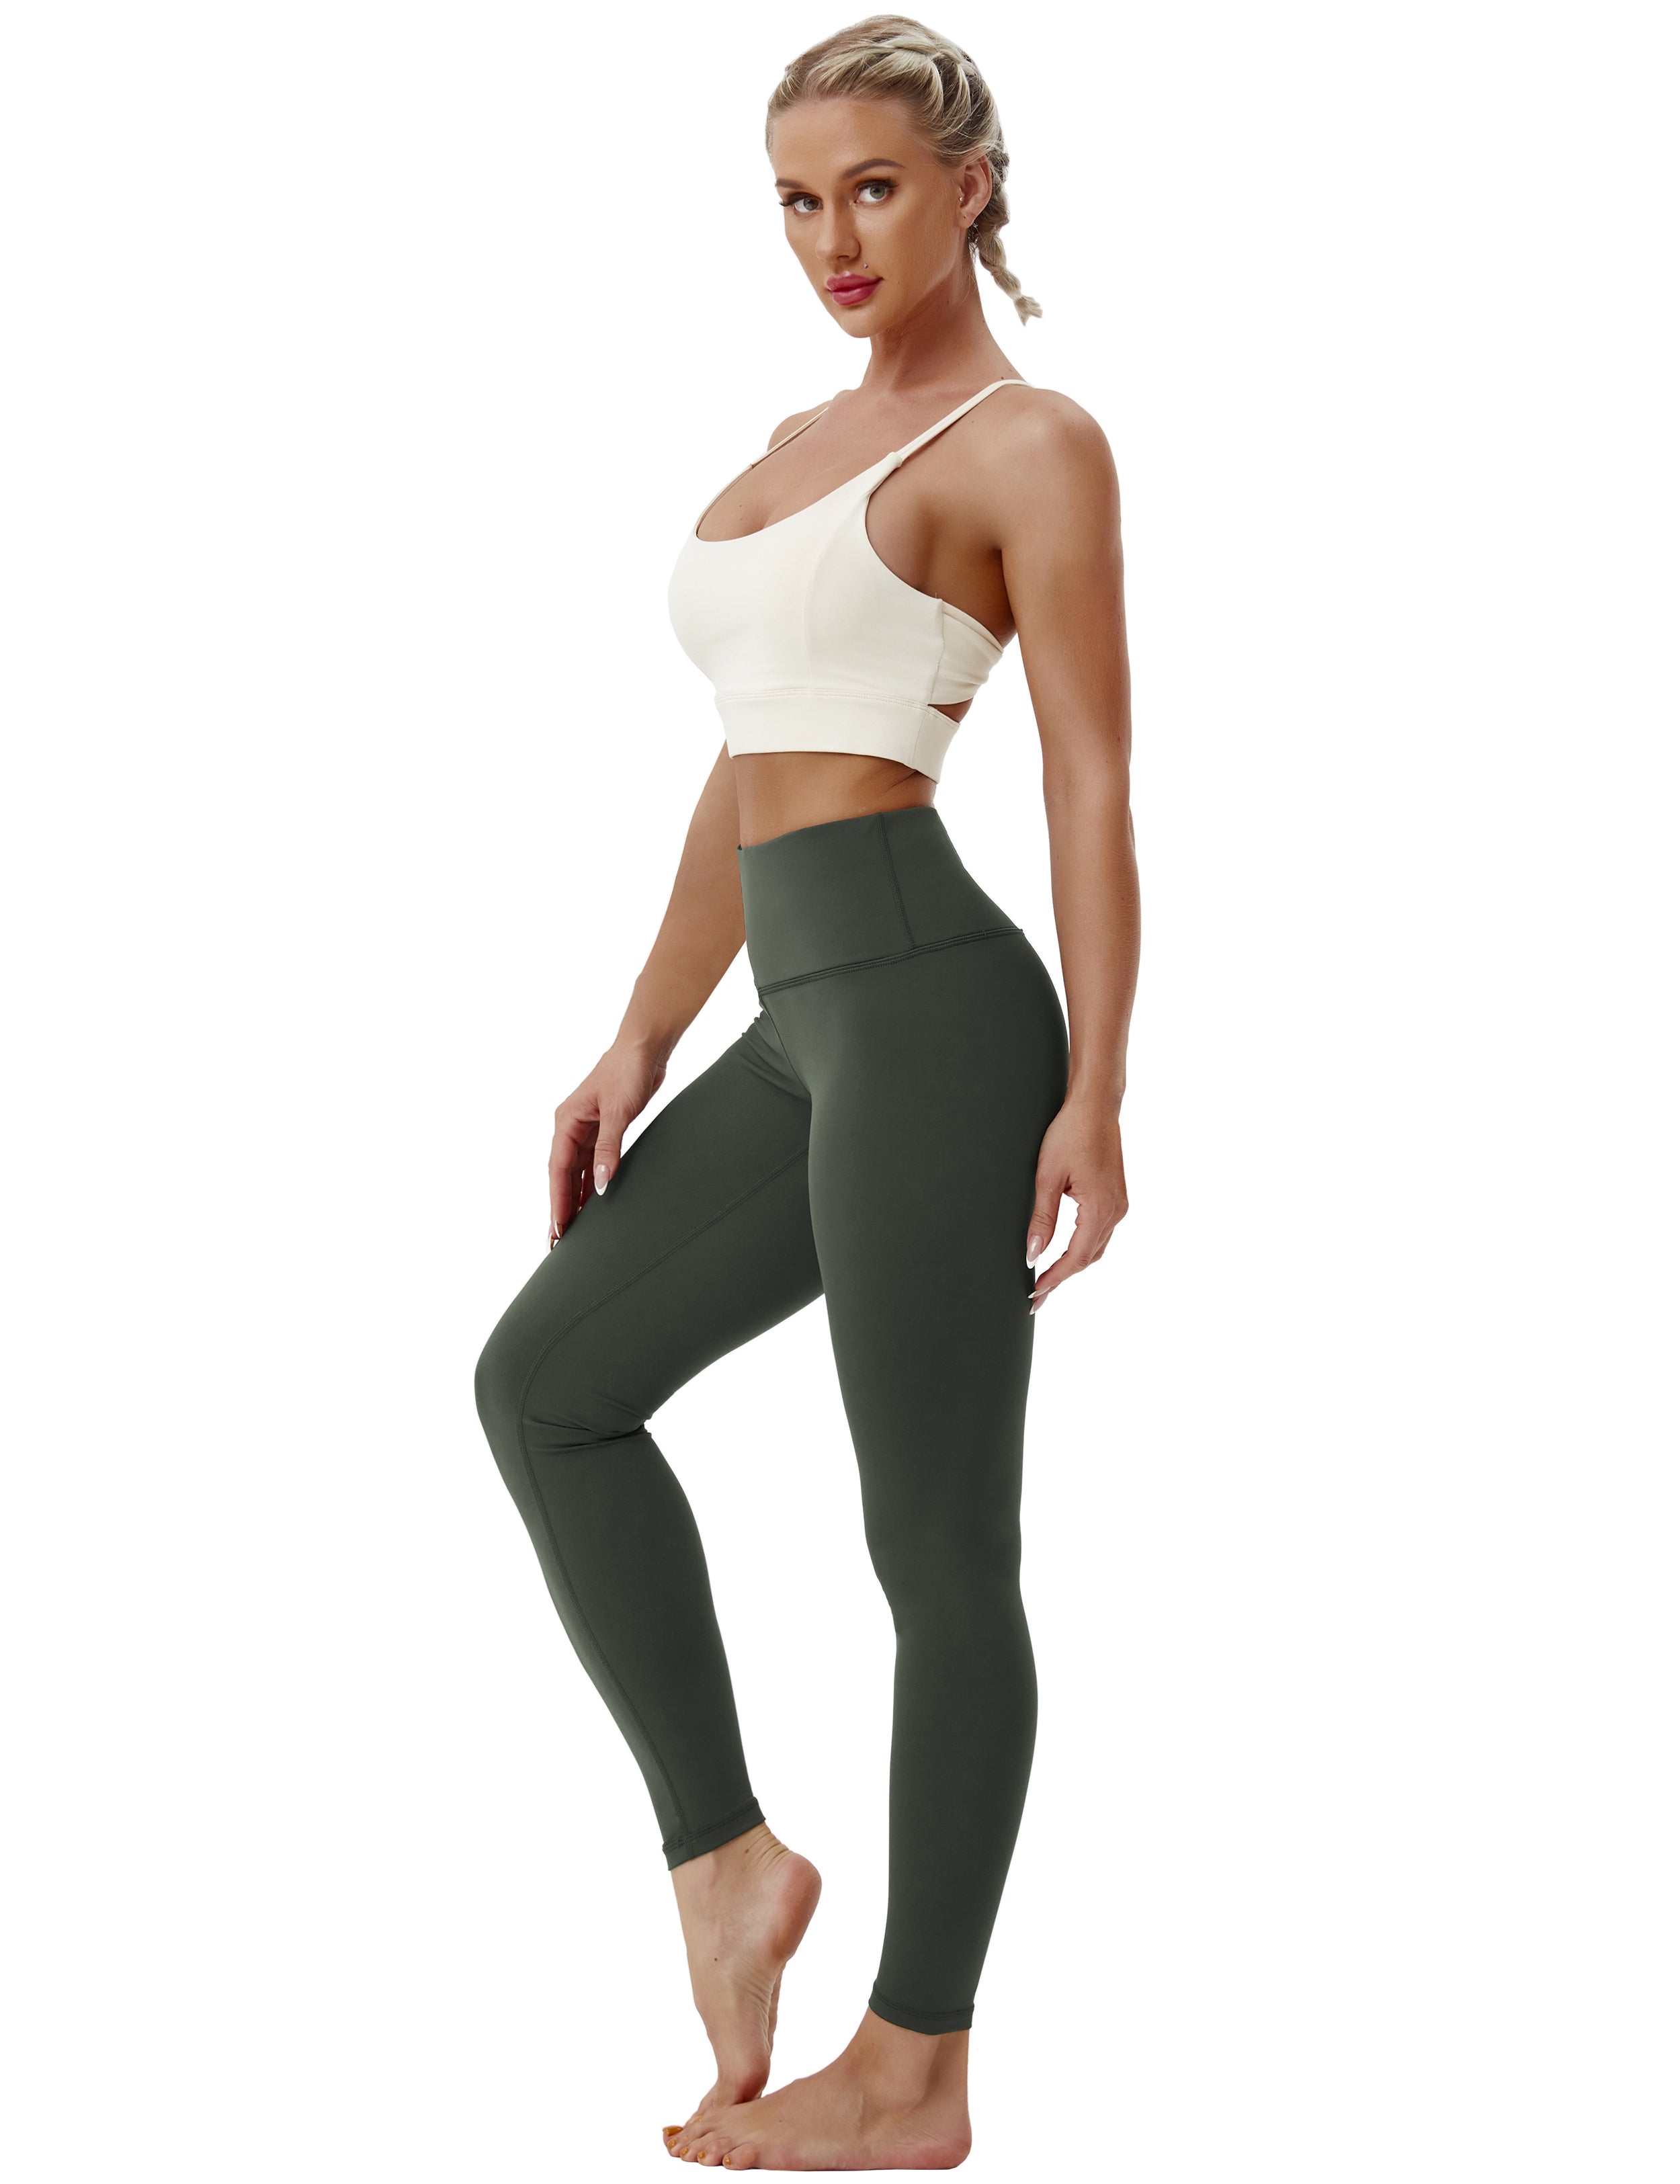 High Waist Pilates Pants olivegray 75%Nylon/25%Spandex Fabric doesn't attract lint easily 4-way stretch No see-through Moisture-wicking Tummy control Inner pocket Four lengths